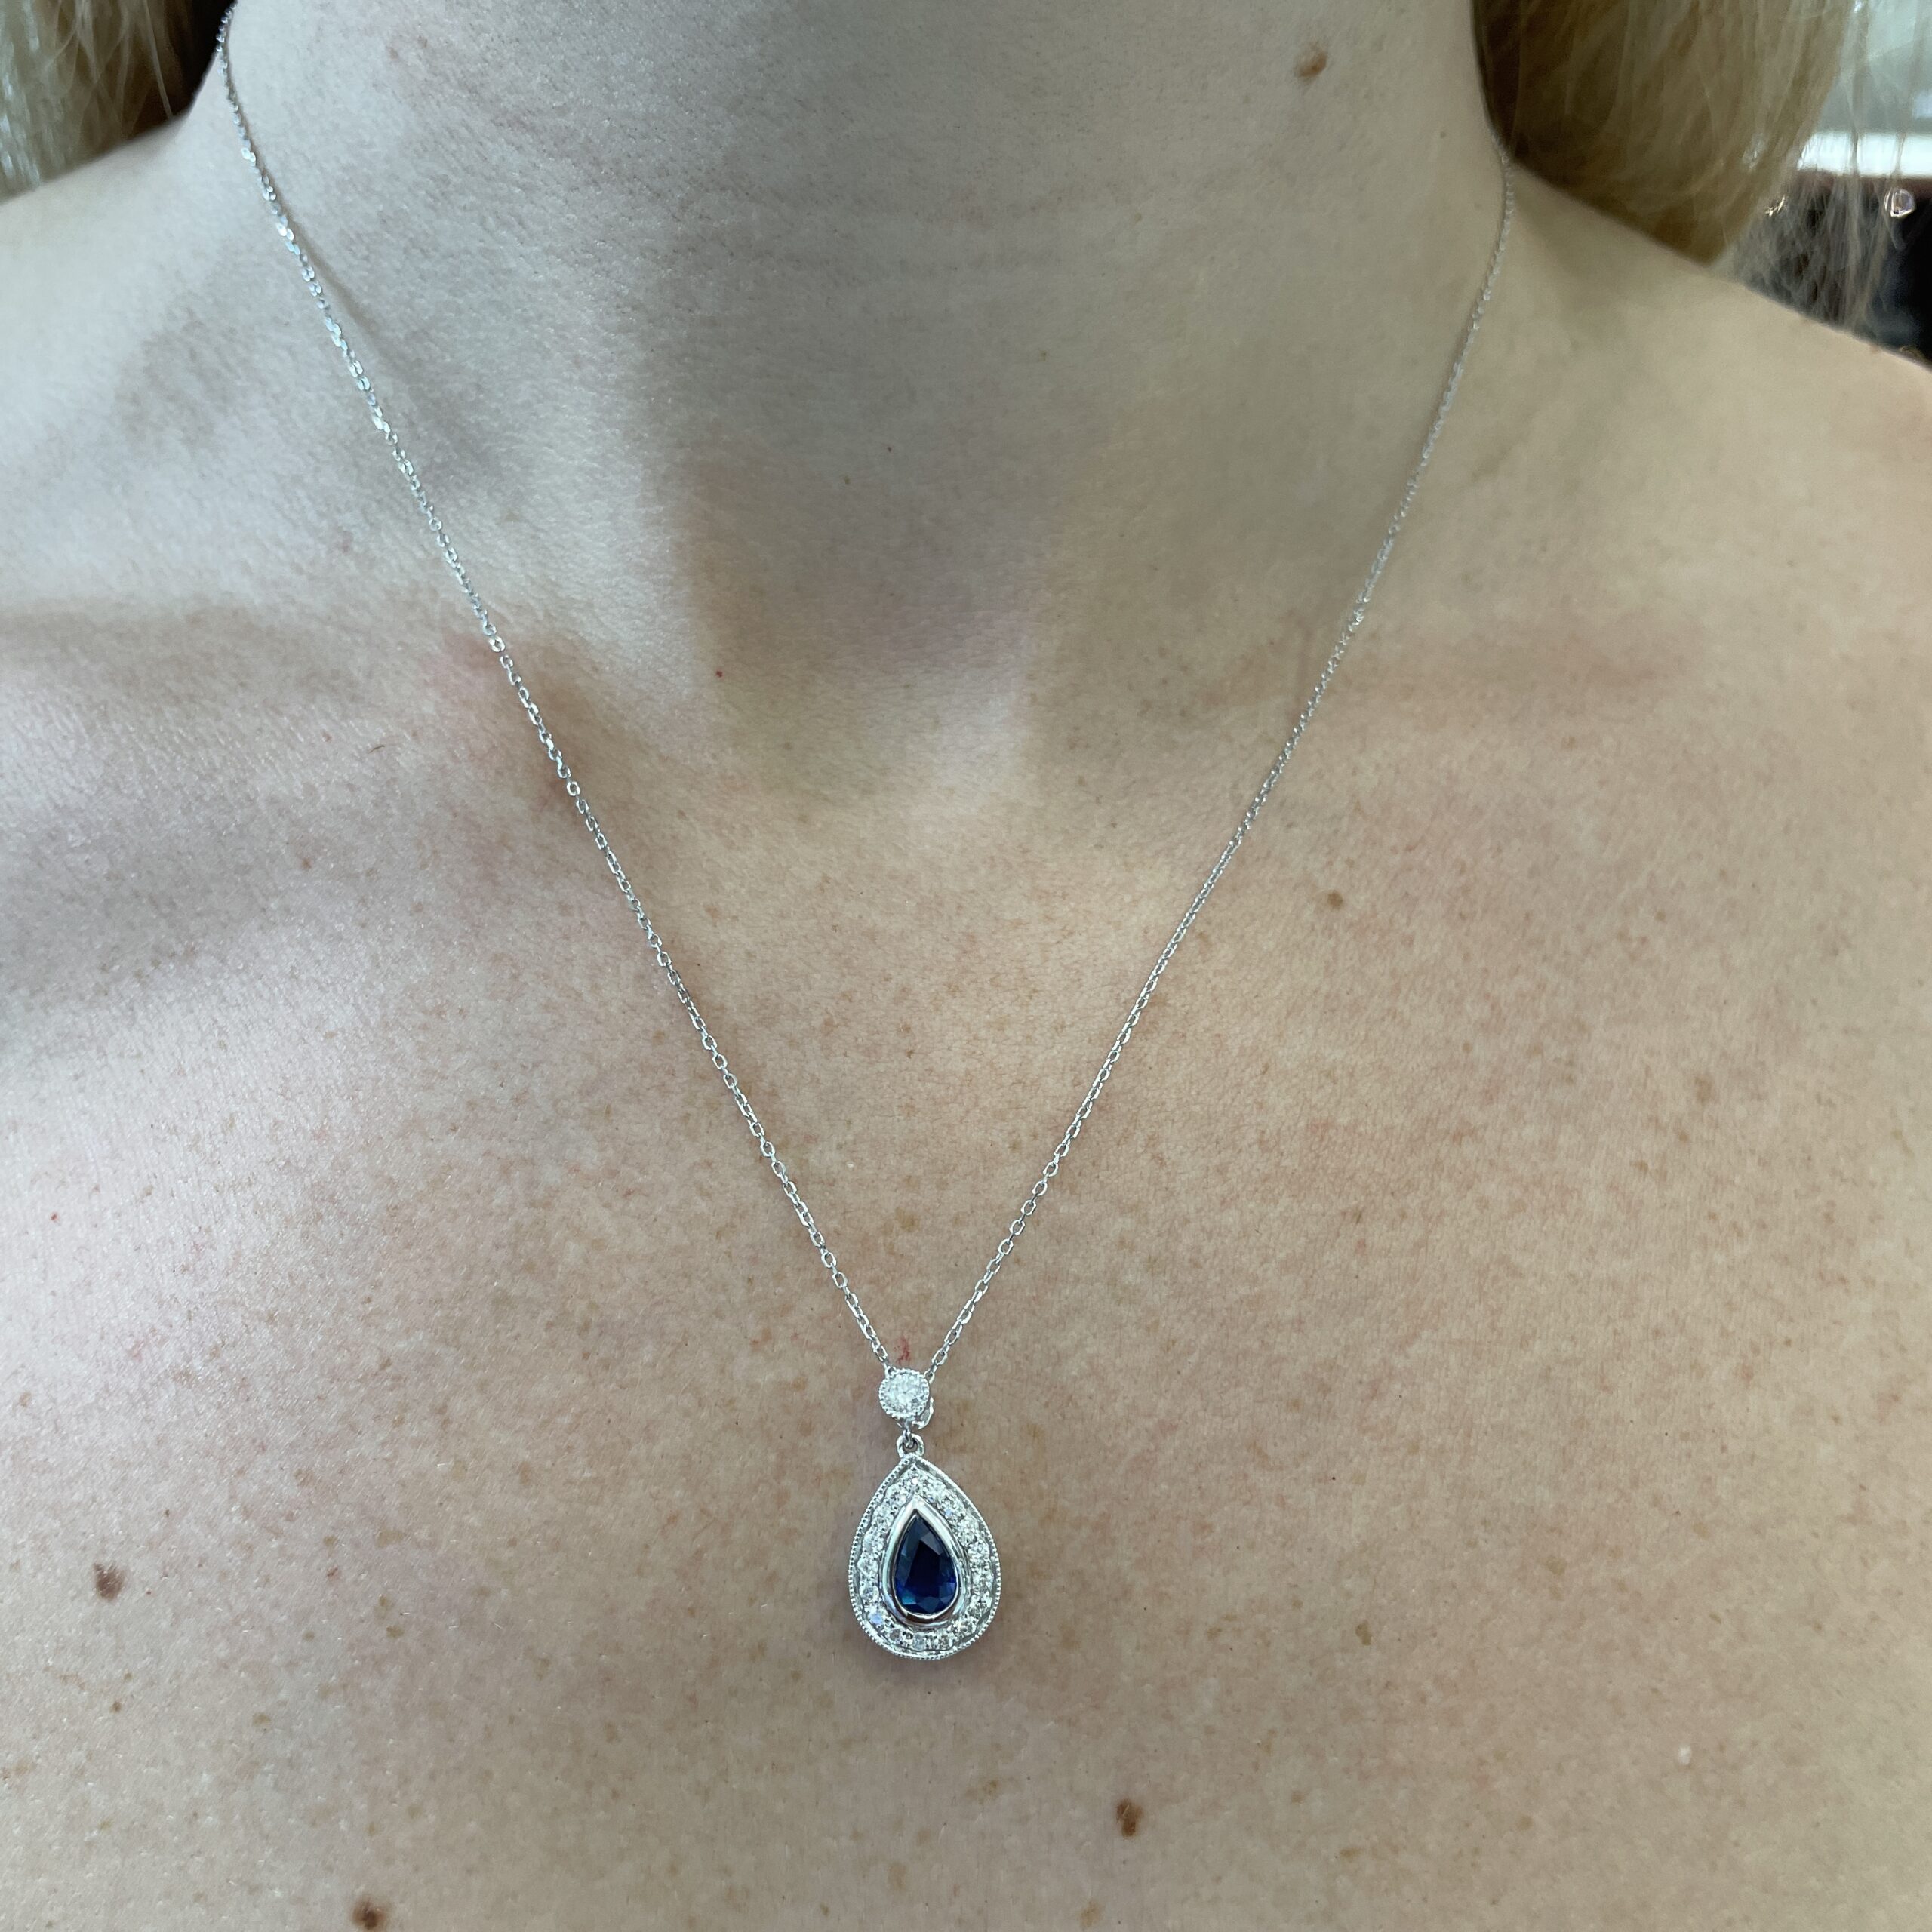 White Gold Sapphire and Diamond Pear Drop Pendant Necklace